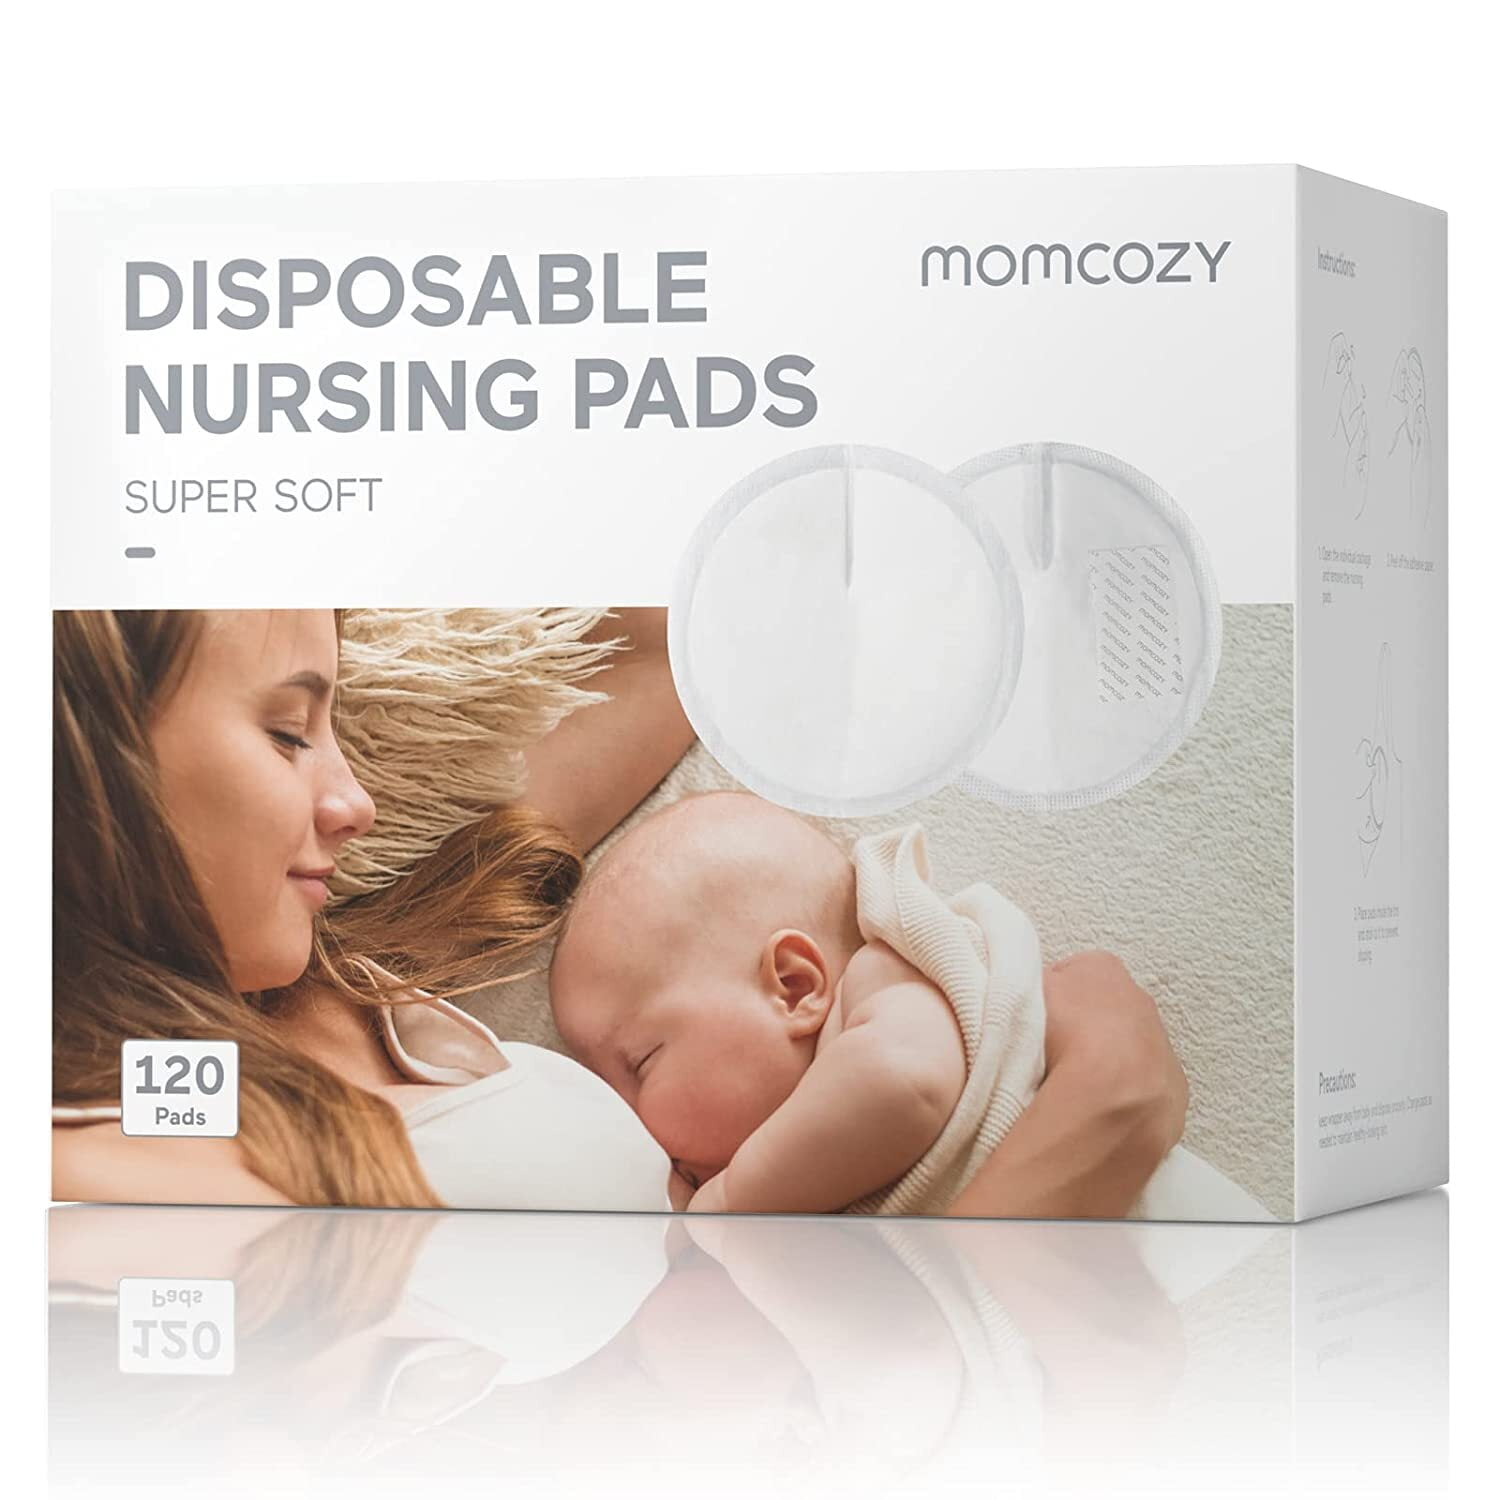  Momcozy Super Soft Nursing Pads Disposable, Fast Absorbent &  Soft Comfortable Breast Pads for Breastfeeding, Extra Fit & Leak-Proof  Nipple Pads, Individually Wrapped, for Sensitive Skin (60 Count) : Baby